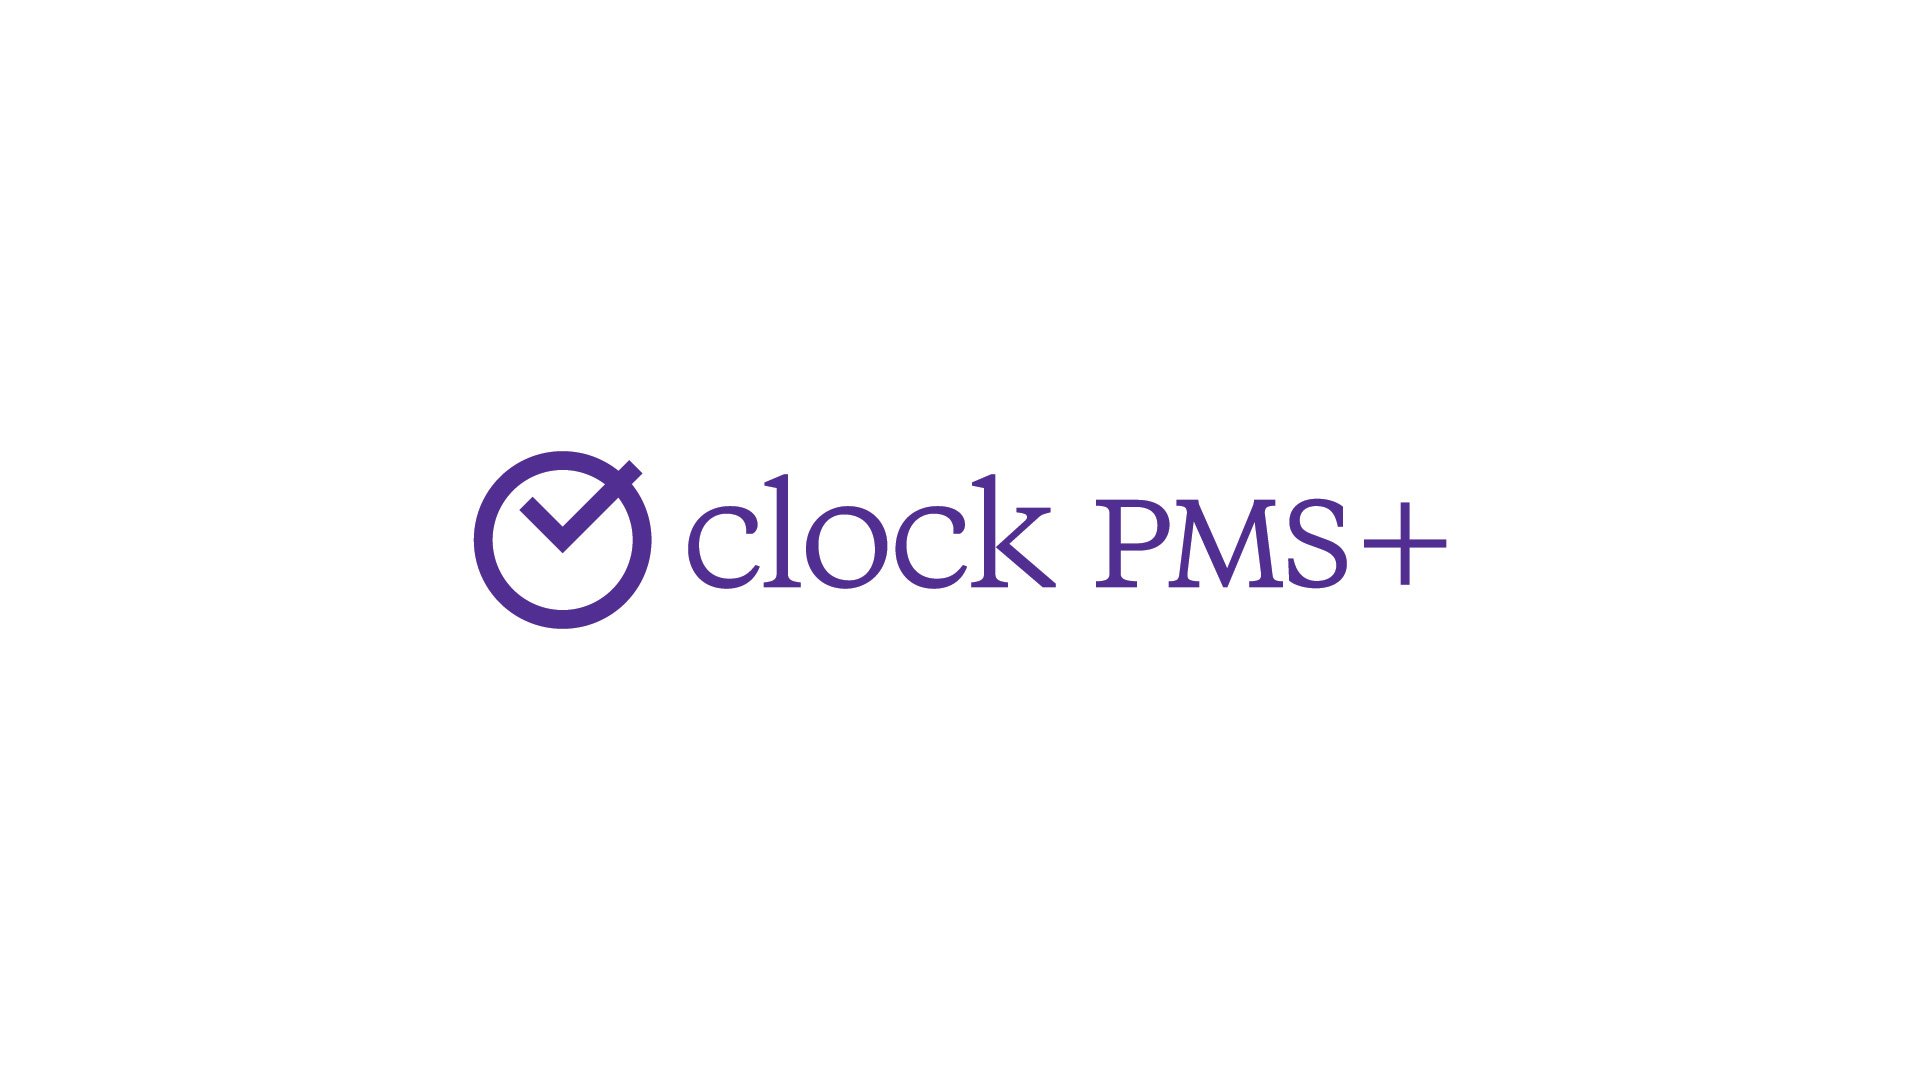 Clock Software introduces Clock Kiosk as part of its cloud hotel system